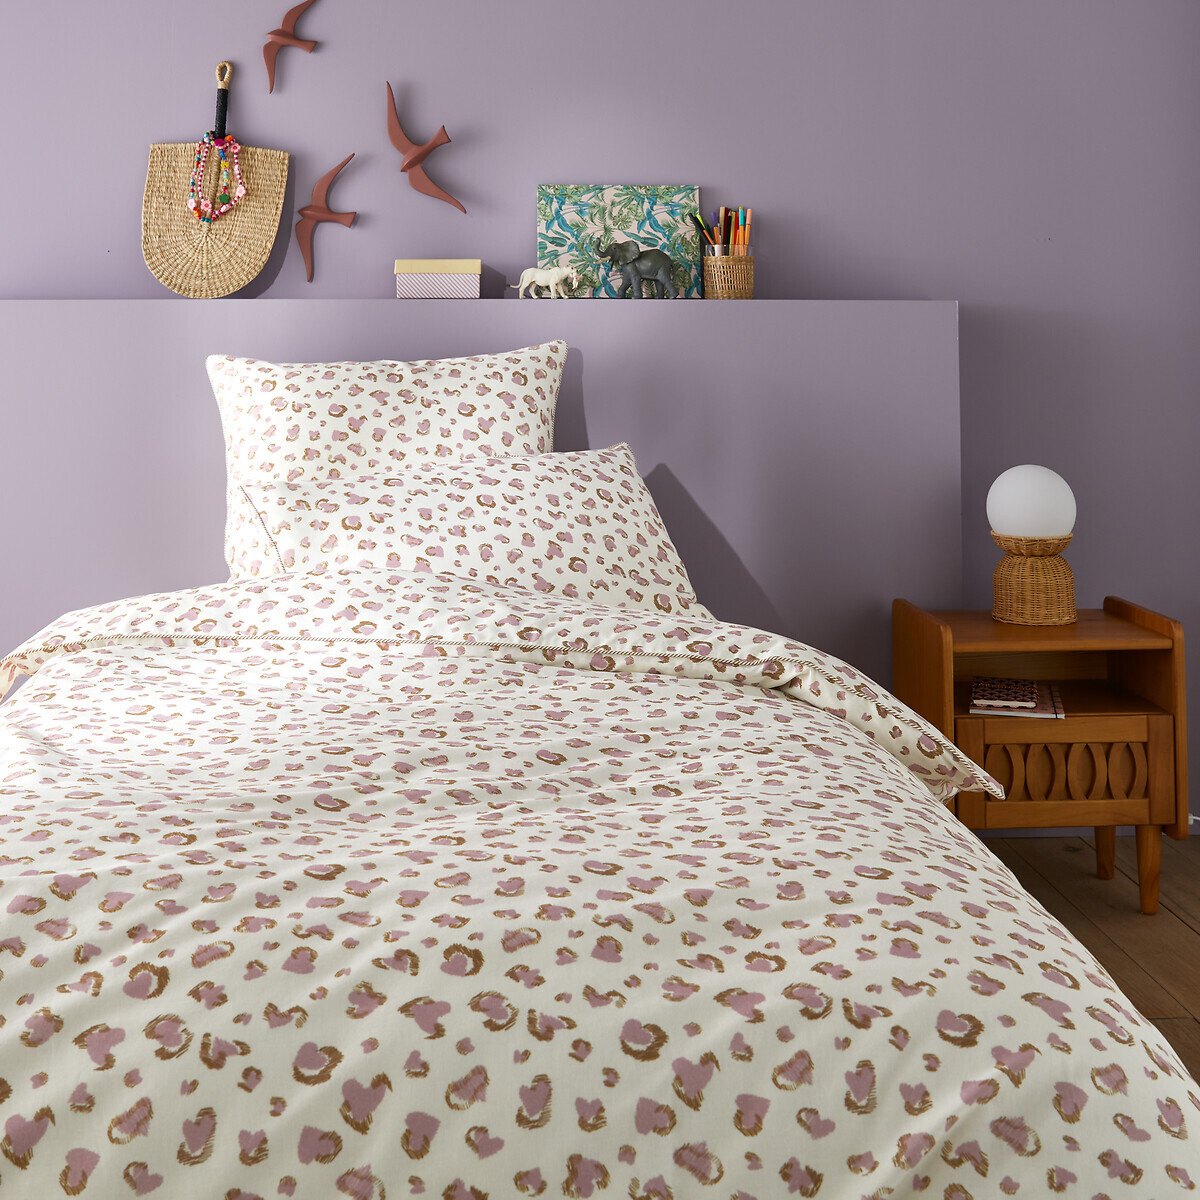 Sovaga Leopard 30% Recycled Cotton Duvet Cover - image 1